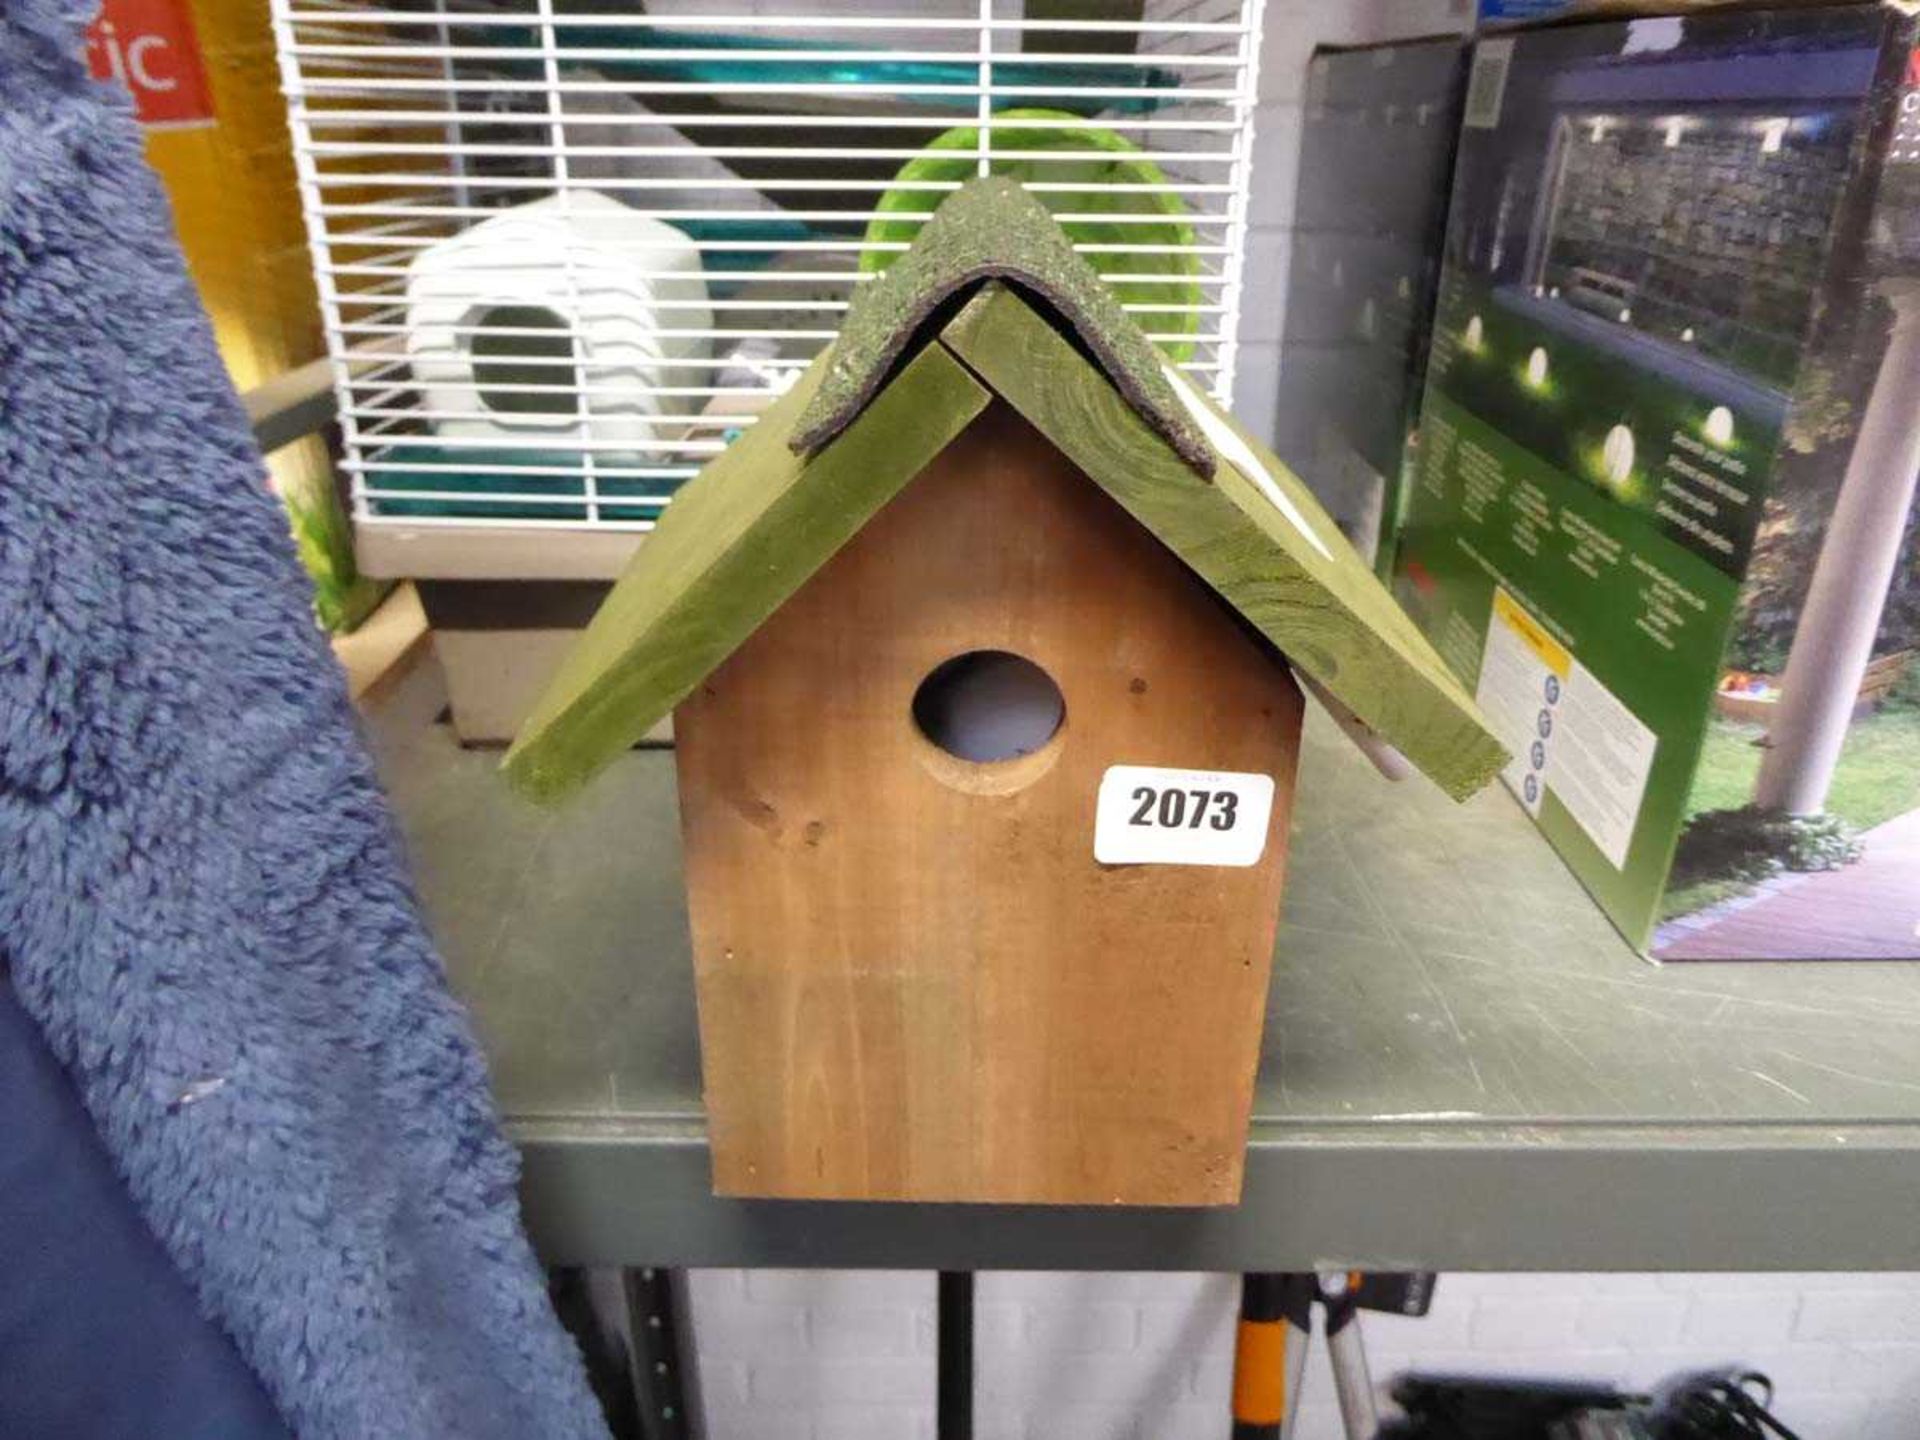 Wooden bird house with integrated camera